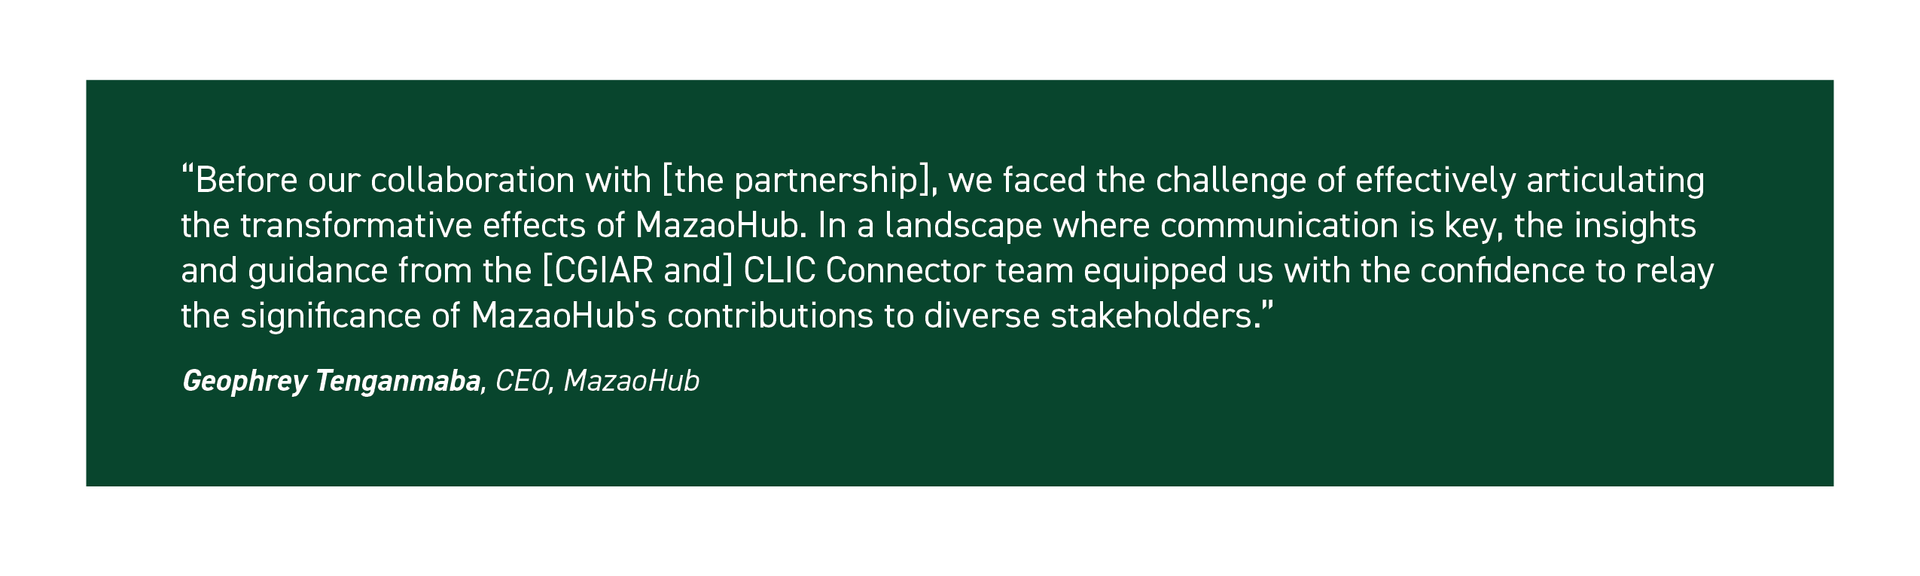 CLIC and CGIAR (ImpactSF) - Quote 3 - Alliance Bioversity International - CIAT